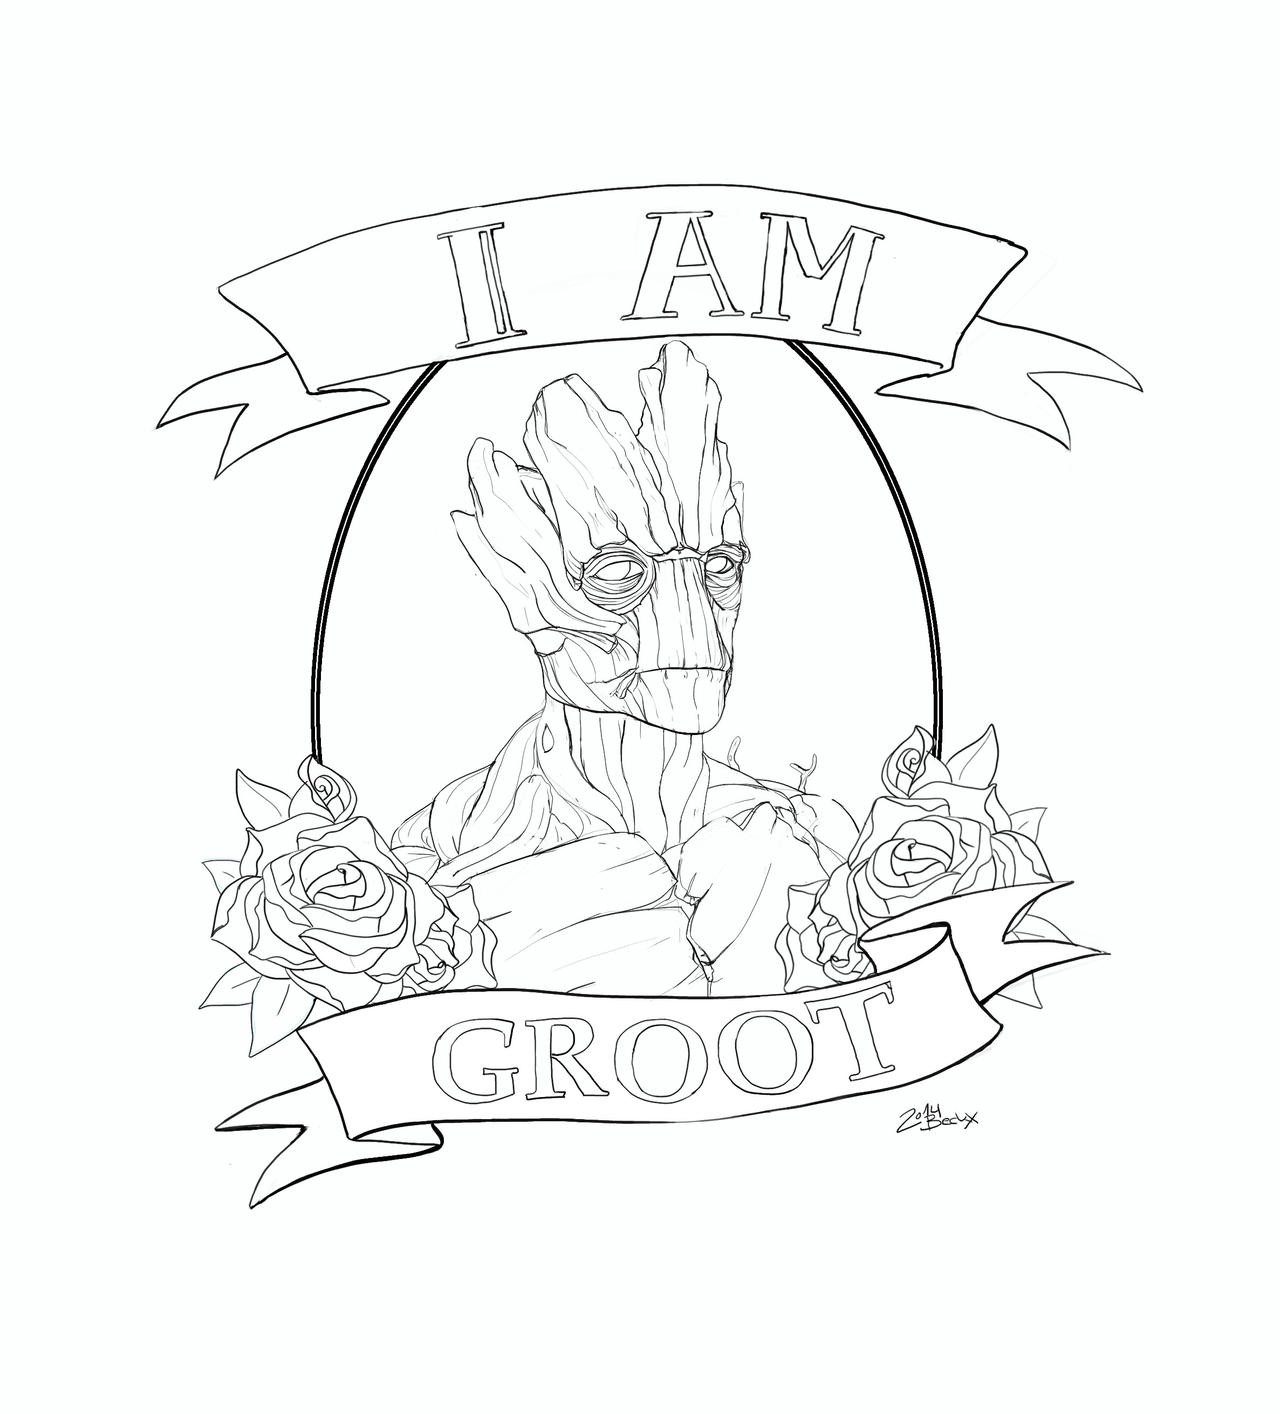 i am groot  tattoo design commission  linesdiebeckx